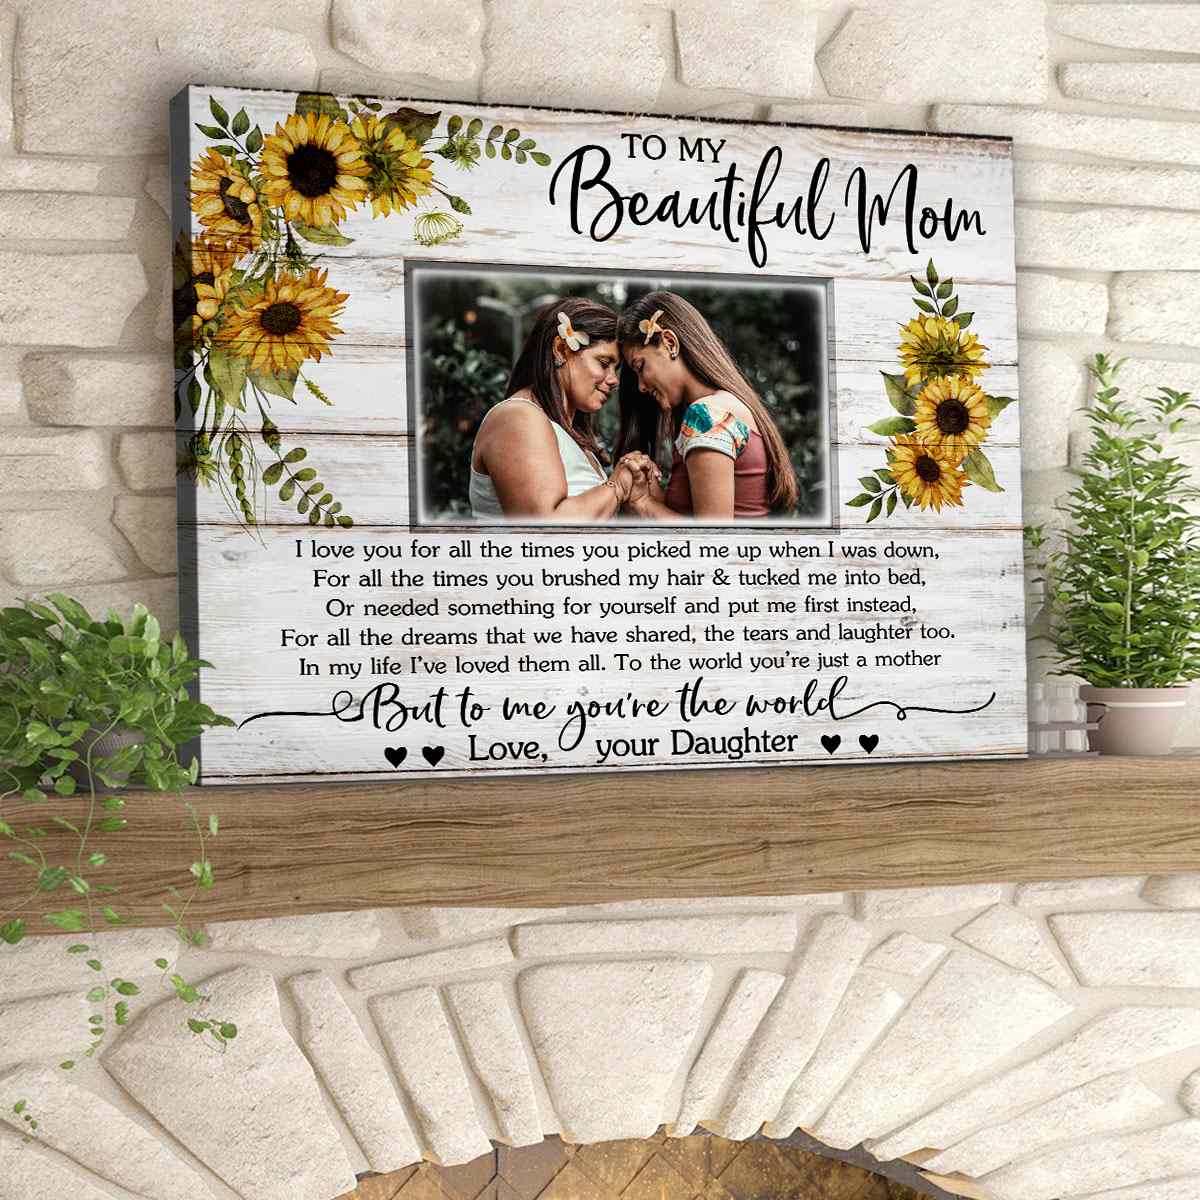 https://images.ohcanvas.com/ohcanvas_com/2022/03/10024151/custom-photo-gift-for-mom-from-daughter-with-sweet-message-canvas-wall-art.jpg